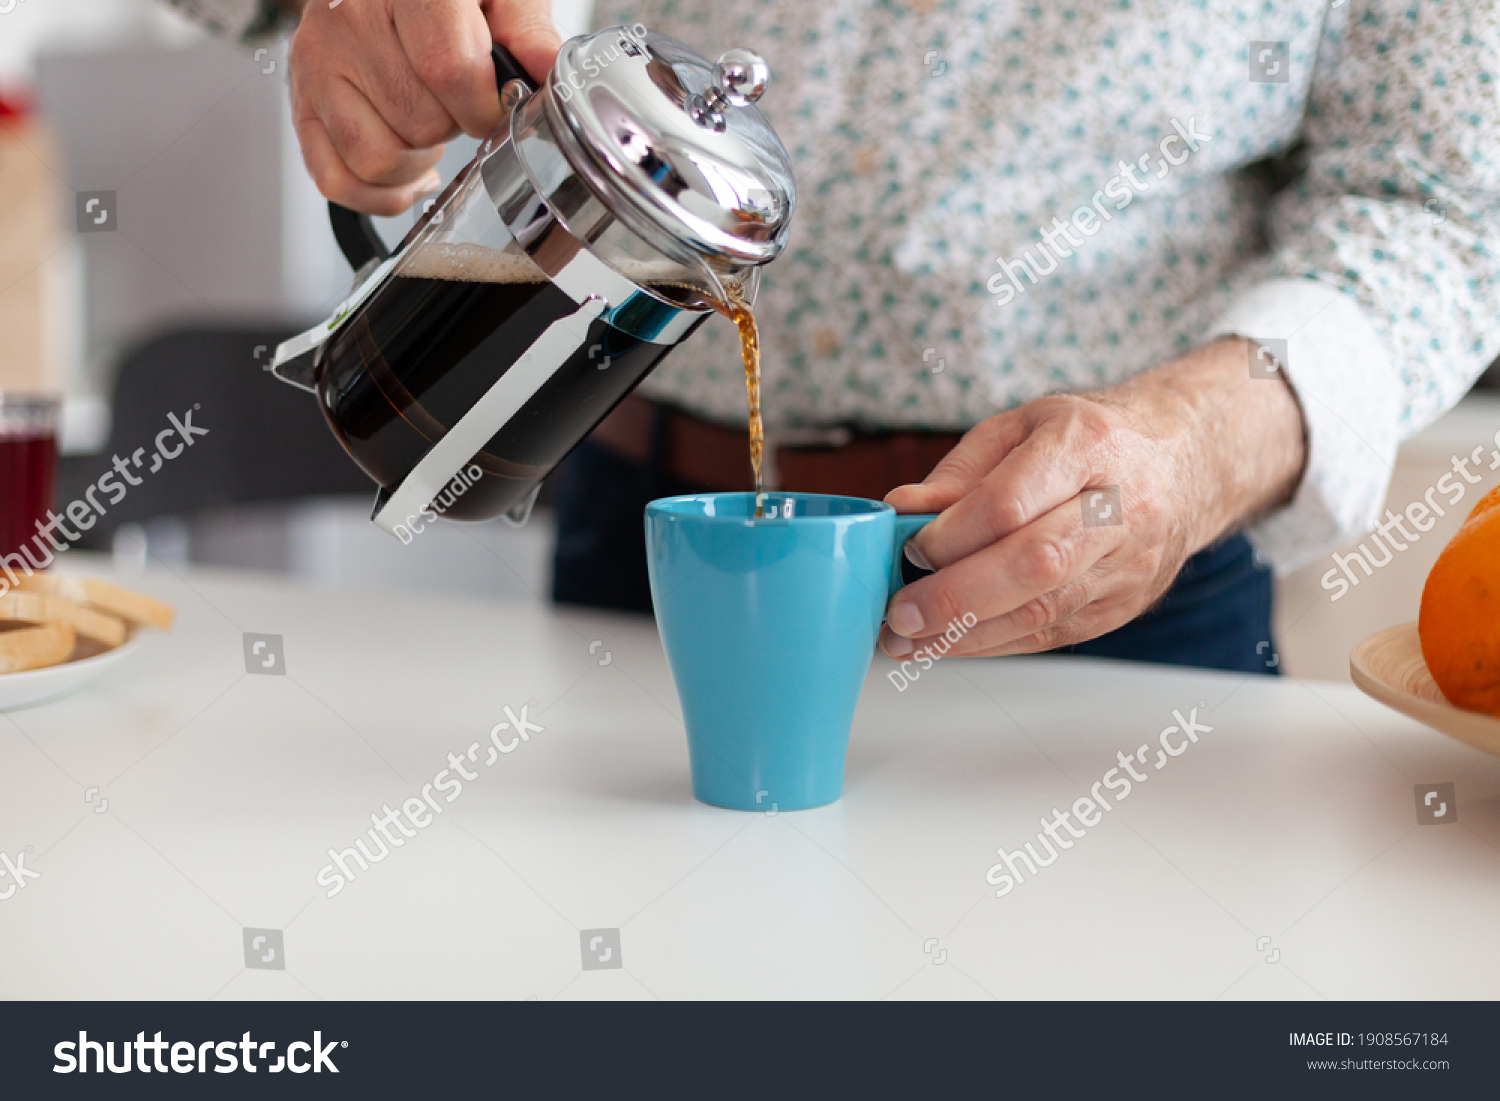 Close up of senior man pouring hot coffee from french press in kitchen during breakfast. Elderly person in the morning enjoying fresh brown cafe espresso cup caffeine from vintage mug, filter relax #1908567184